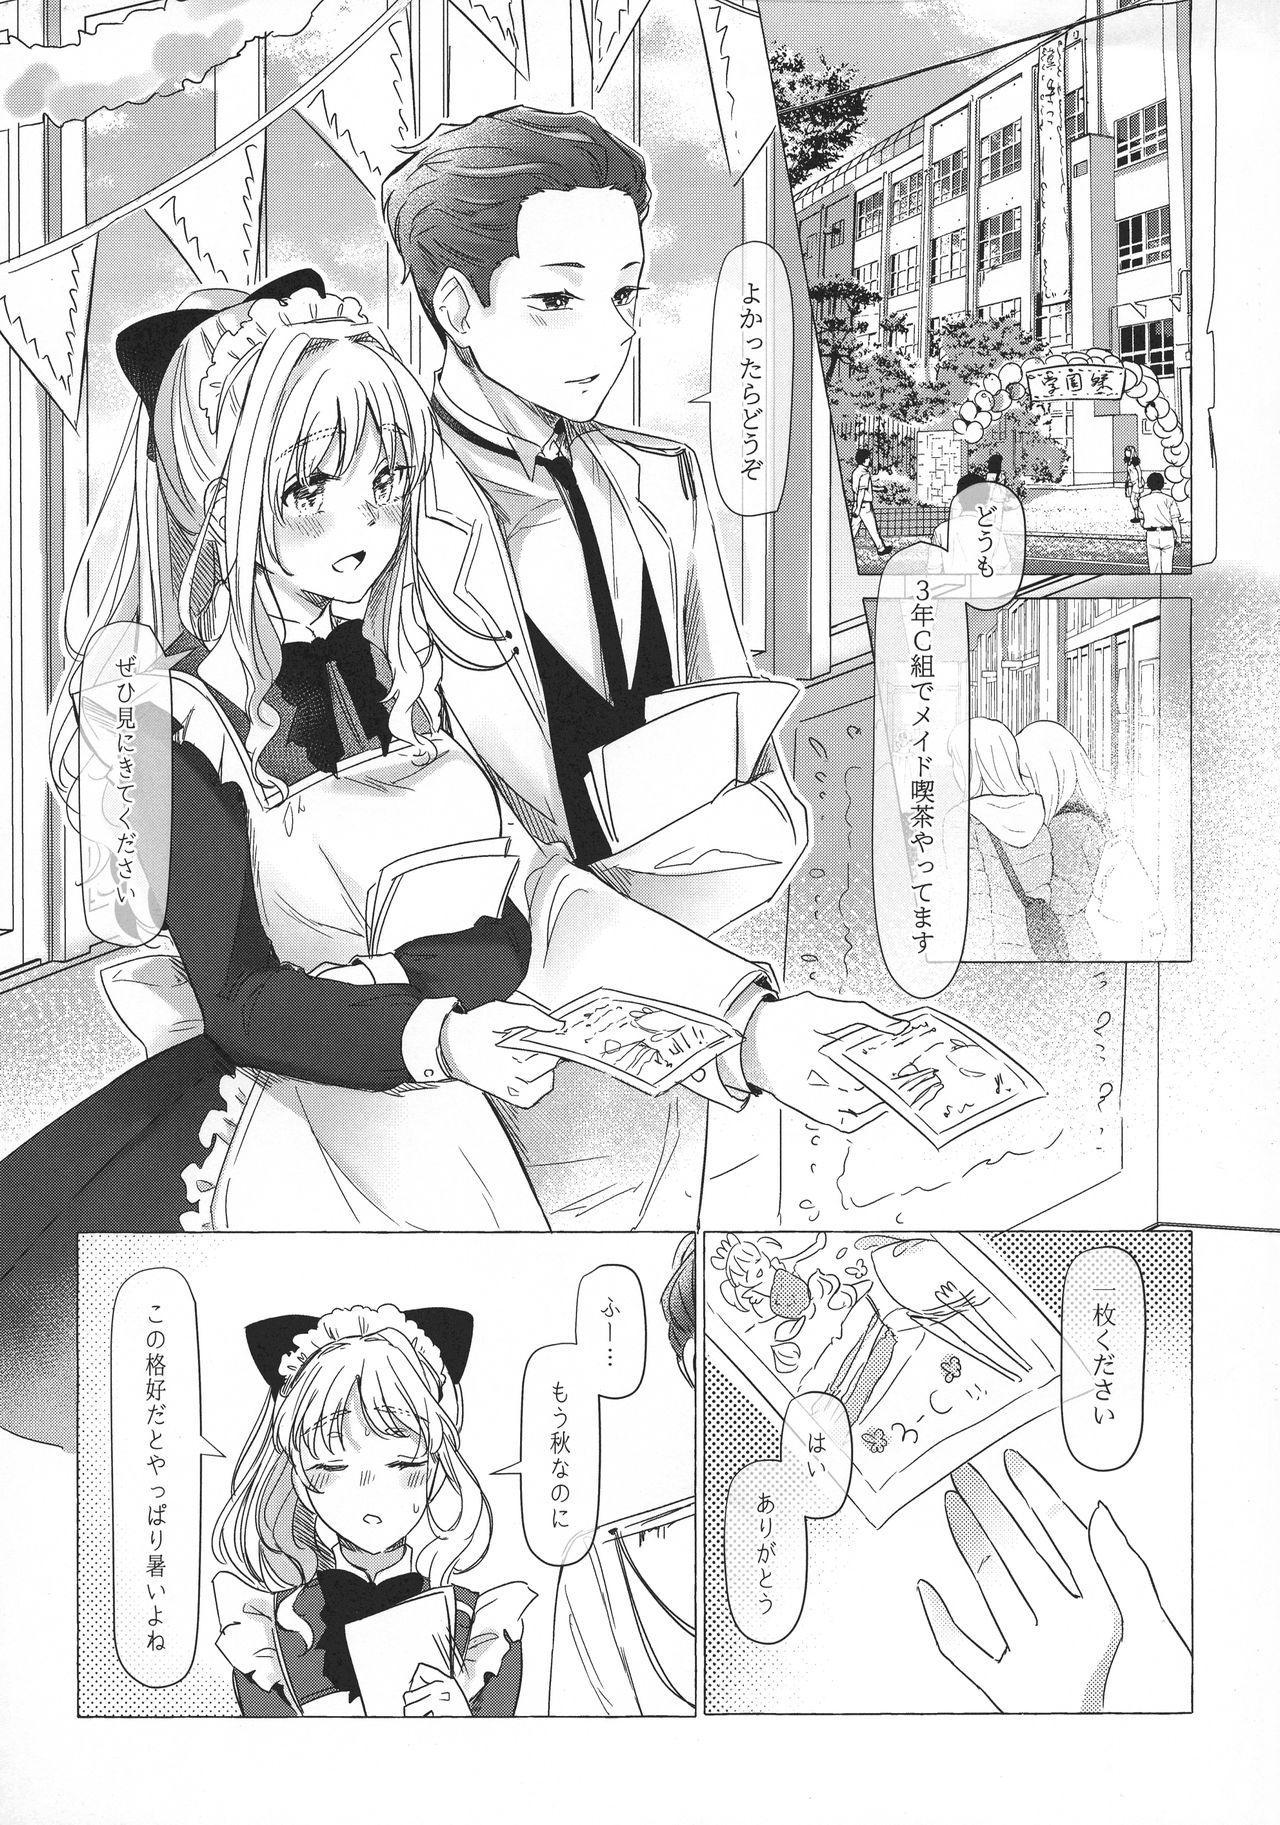 Hot Couple Sex 満心総意の躾 - Darling in the franxx Cumming - Page 4